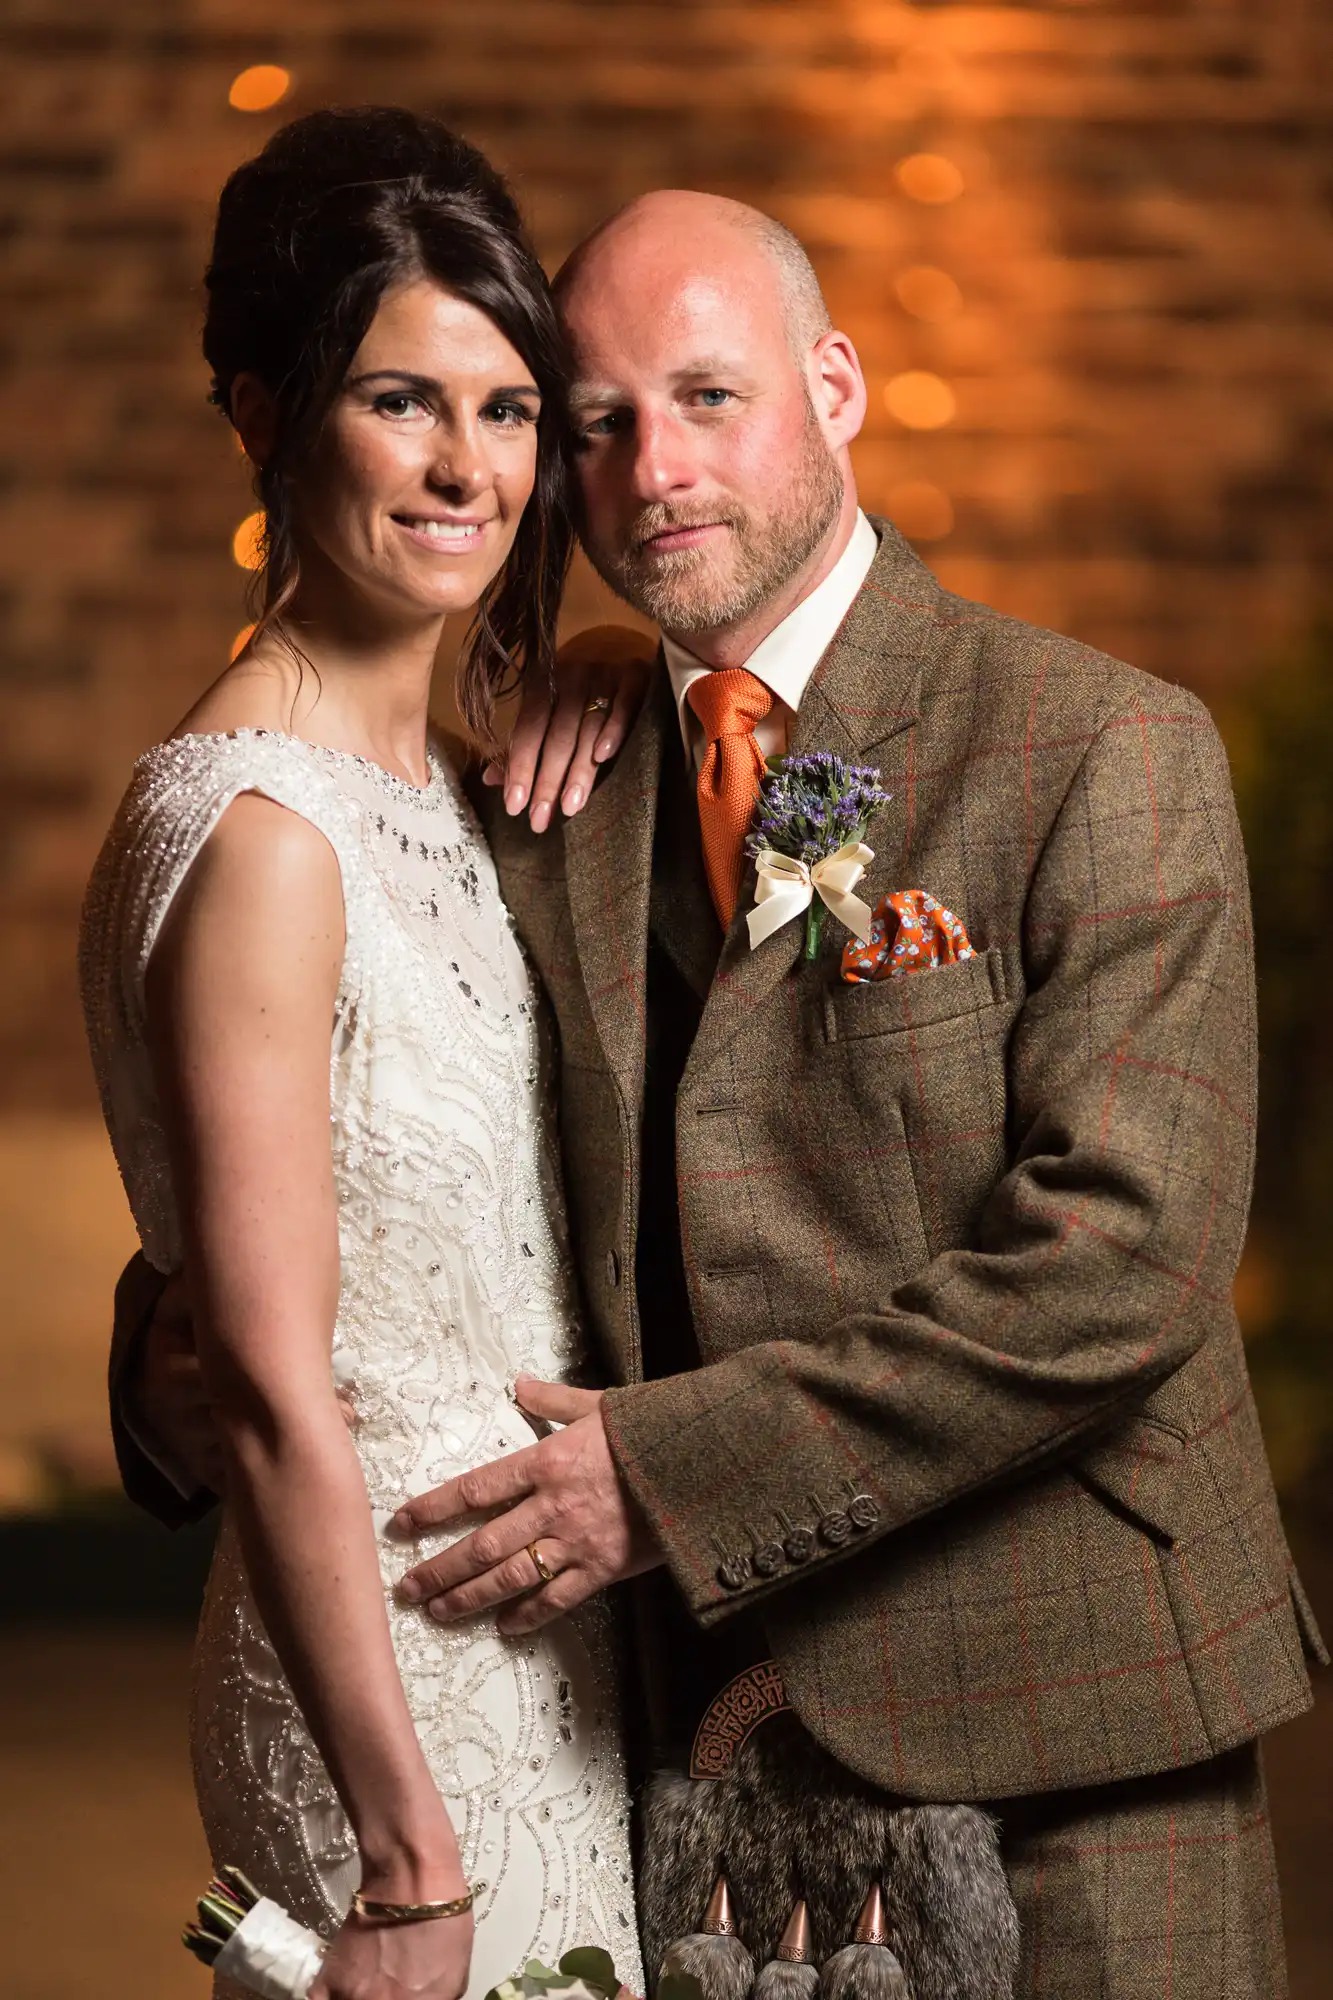 A bride and groom in formal wedding attire standing closely together with a warm, softly lit brick wall in the background.